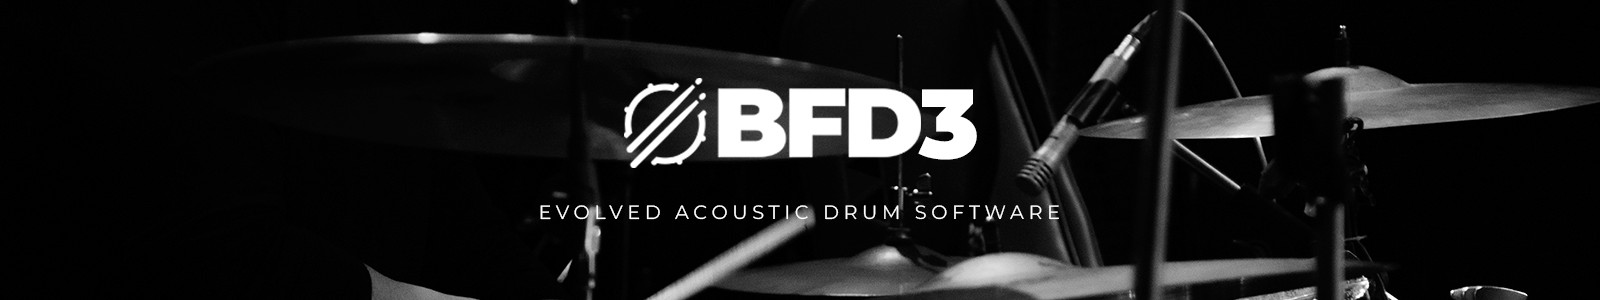 BFD Drums BFD3